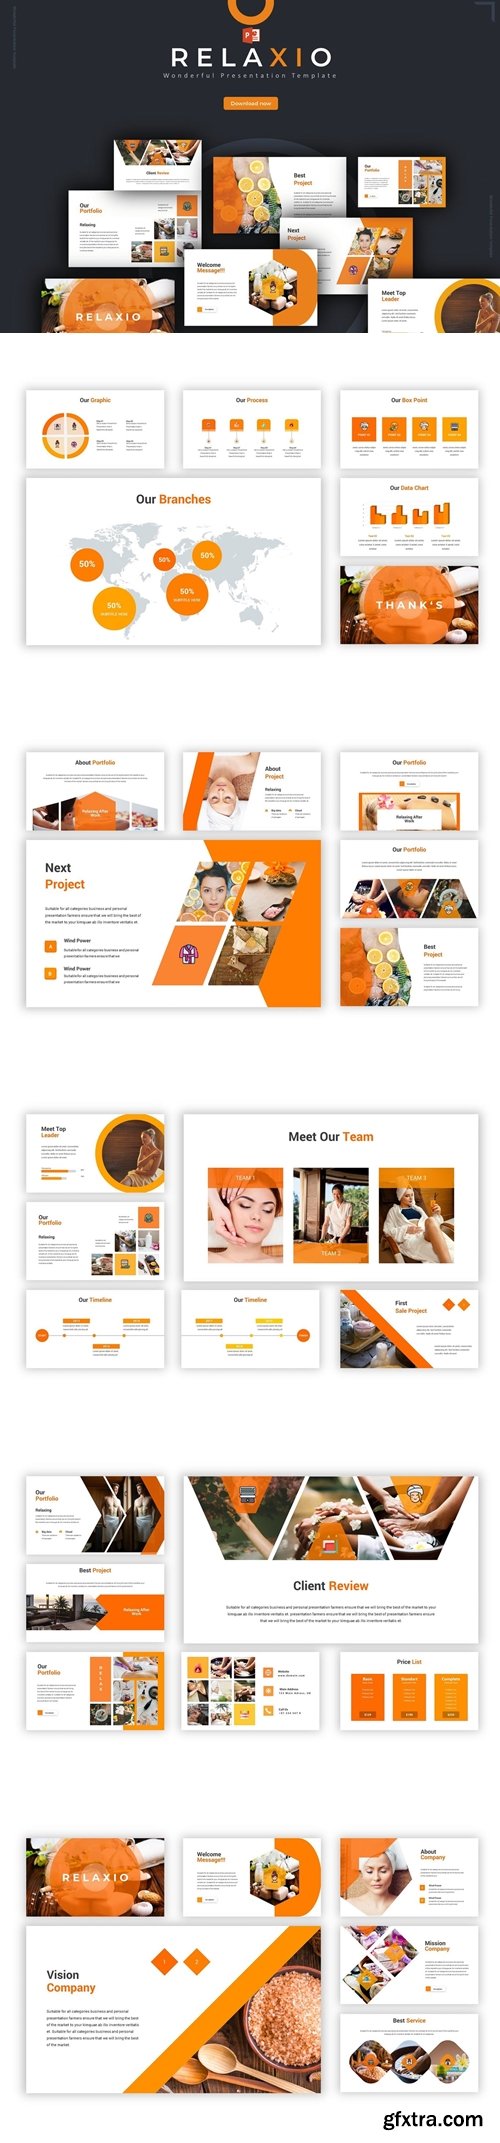 Relaxio - Powerpoint Template